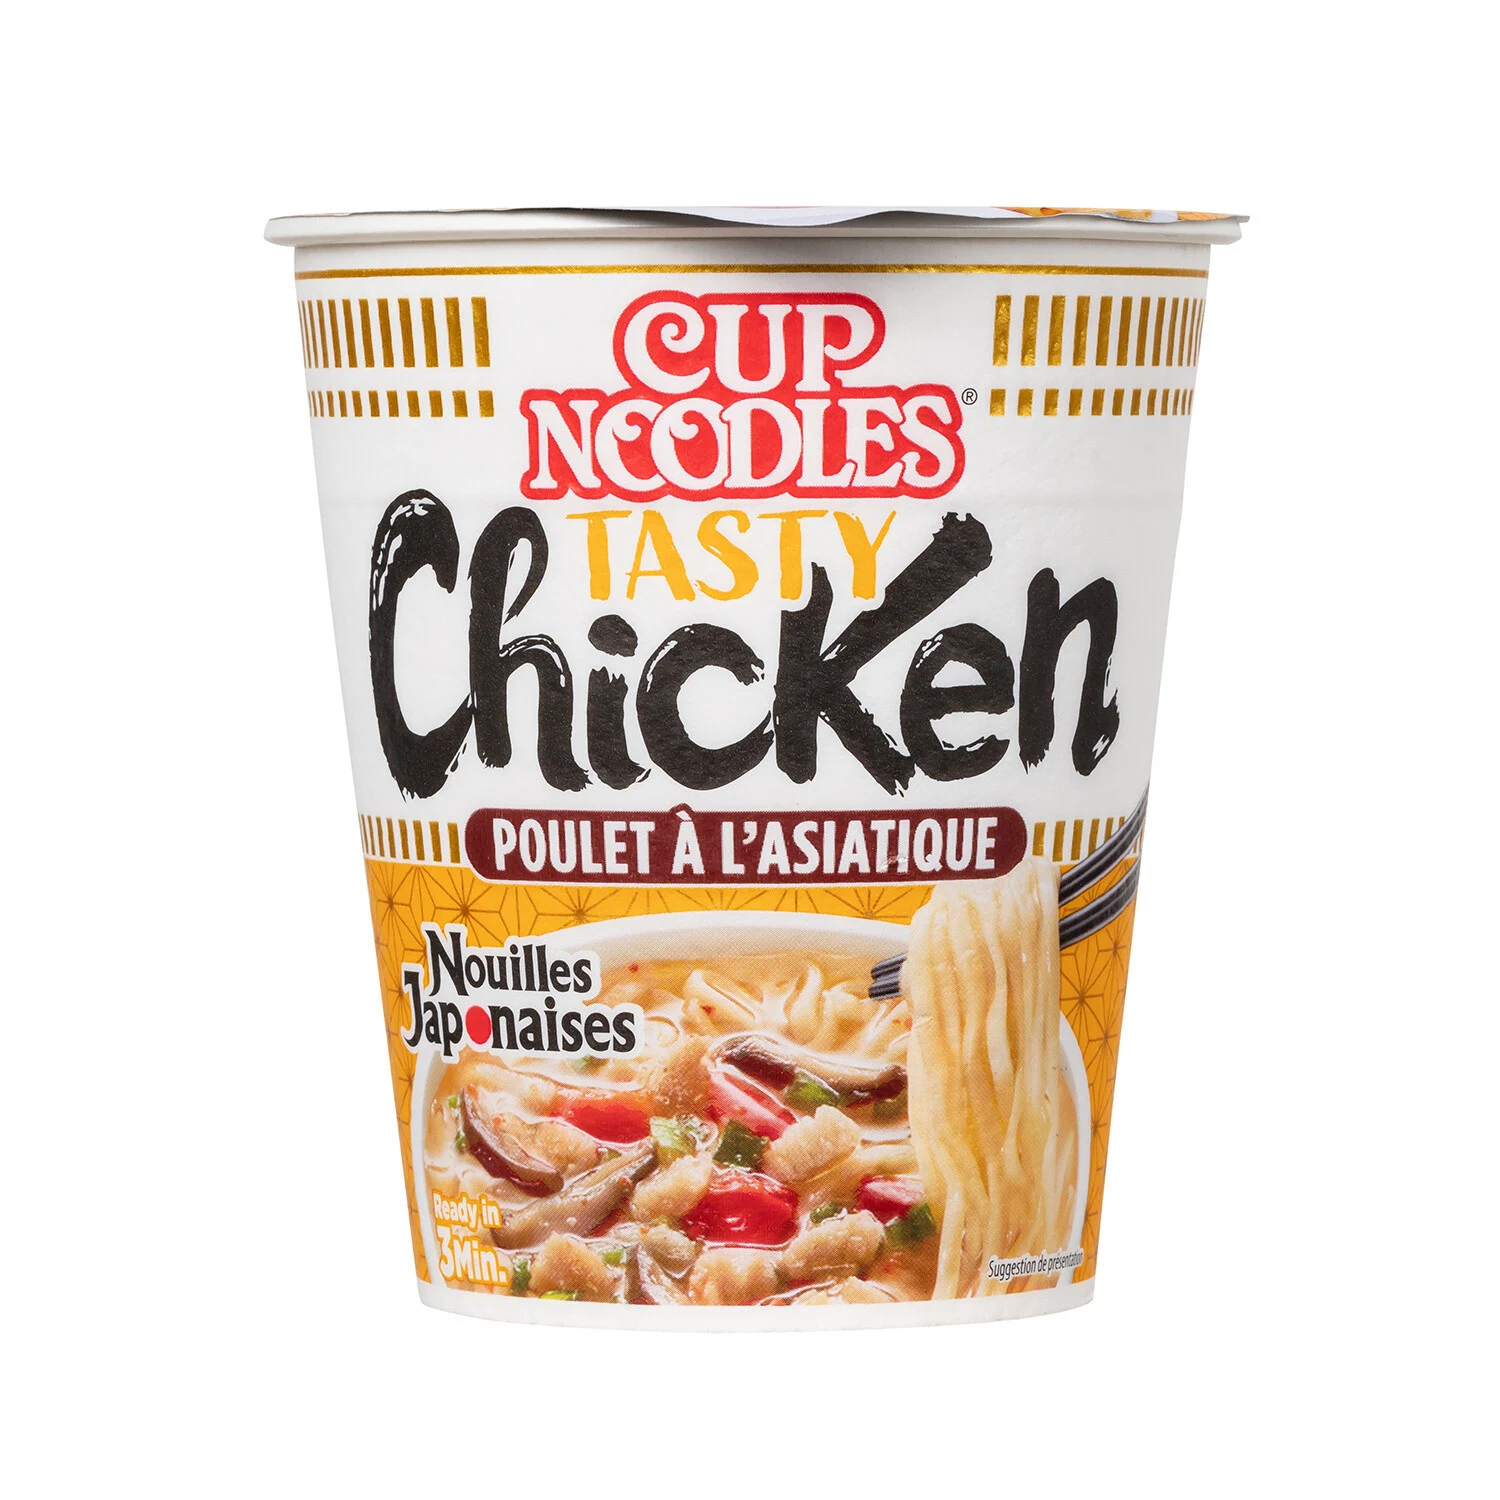 X63g Nj Cup Chicken Ginger